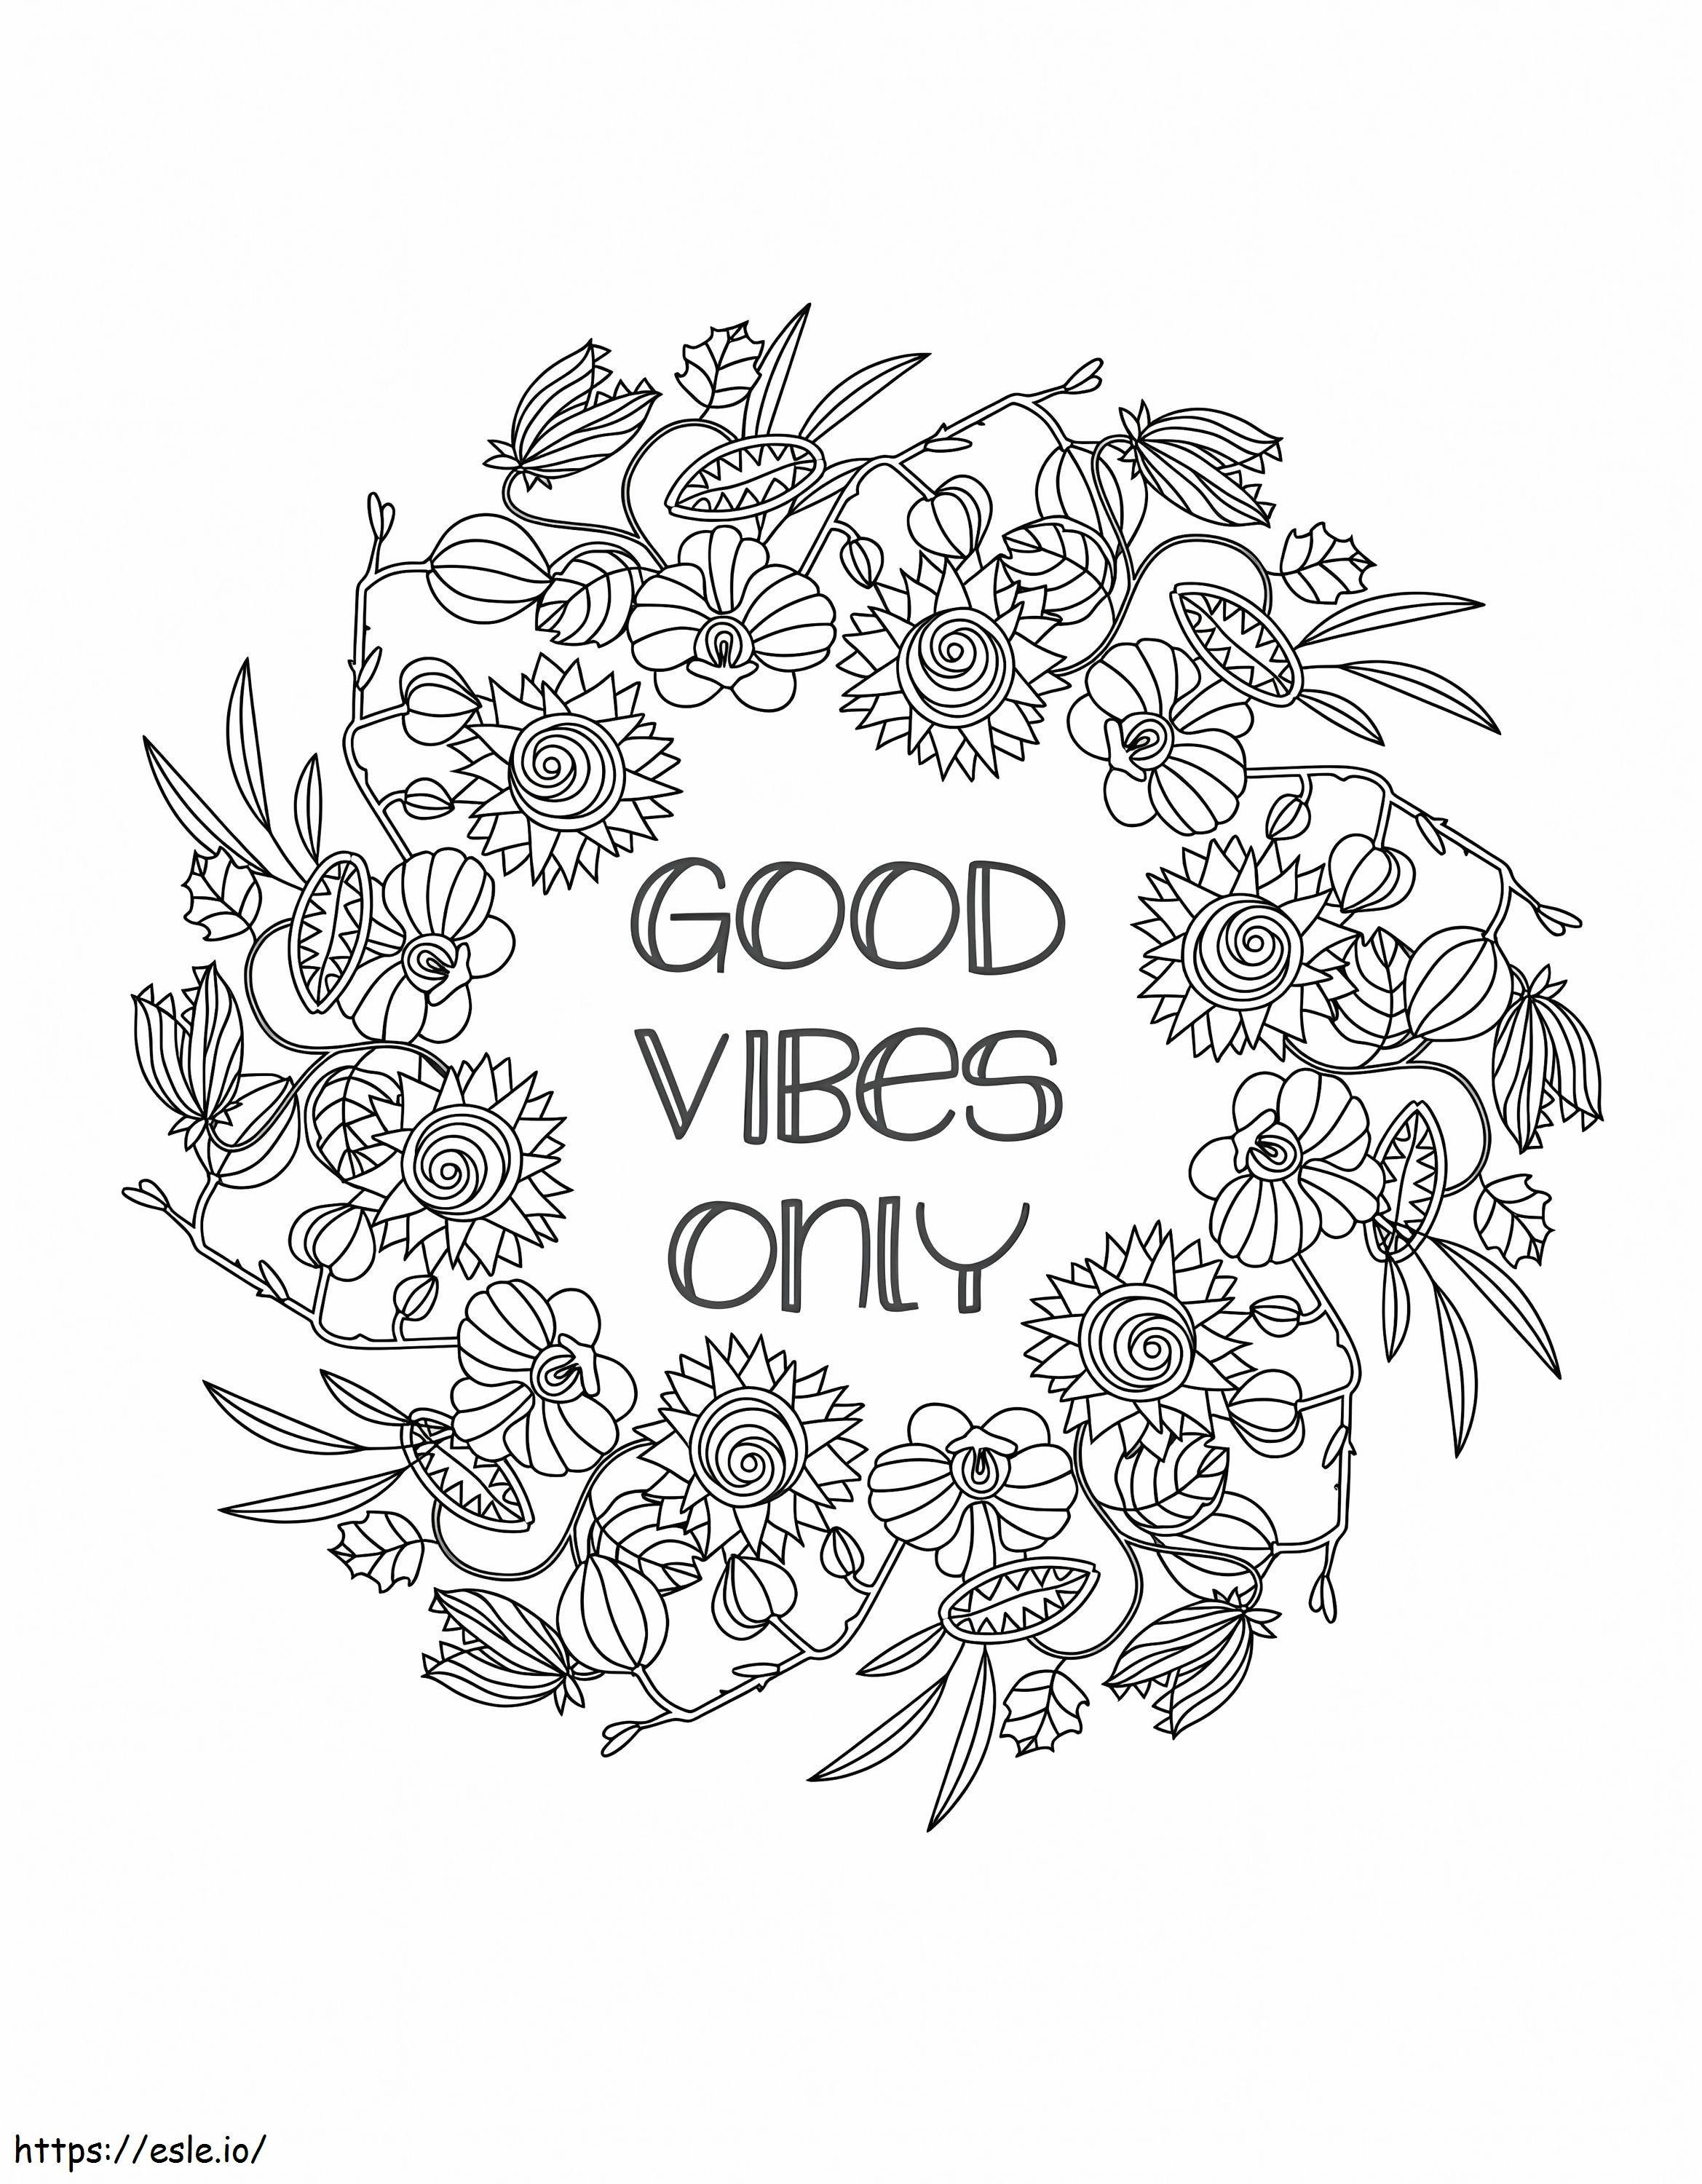 Good Vibes Only coloring page